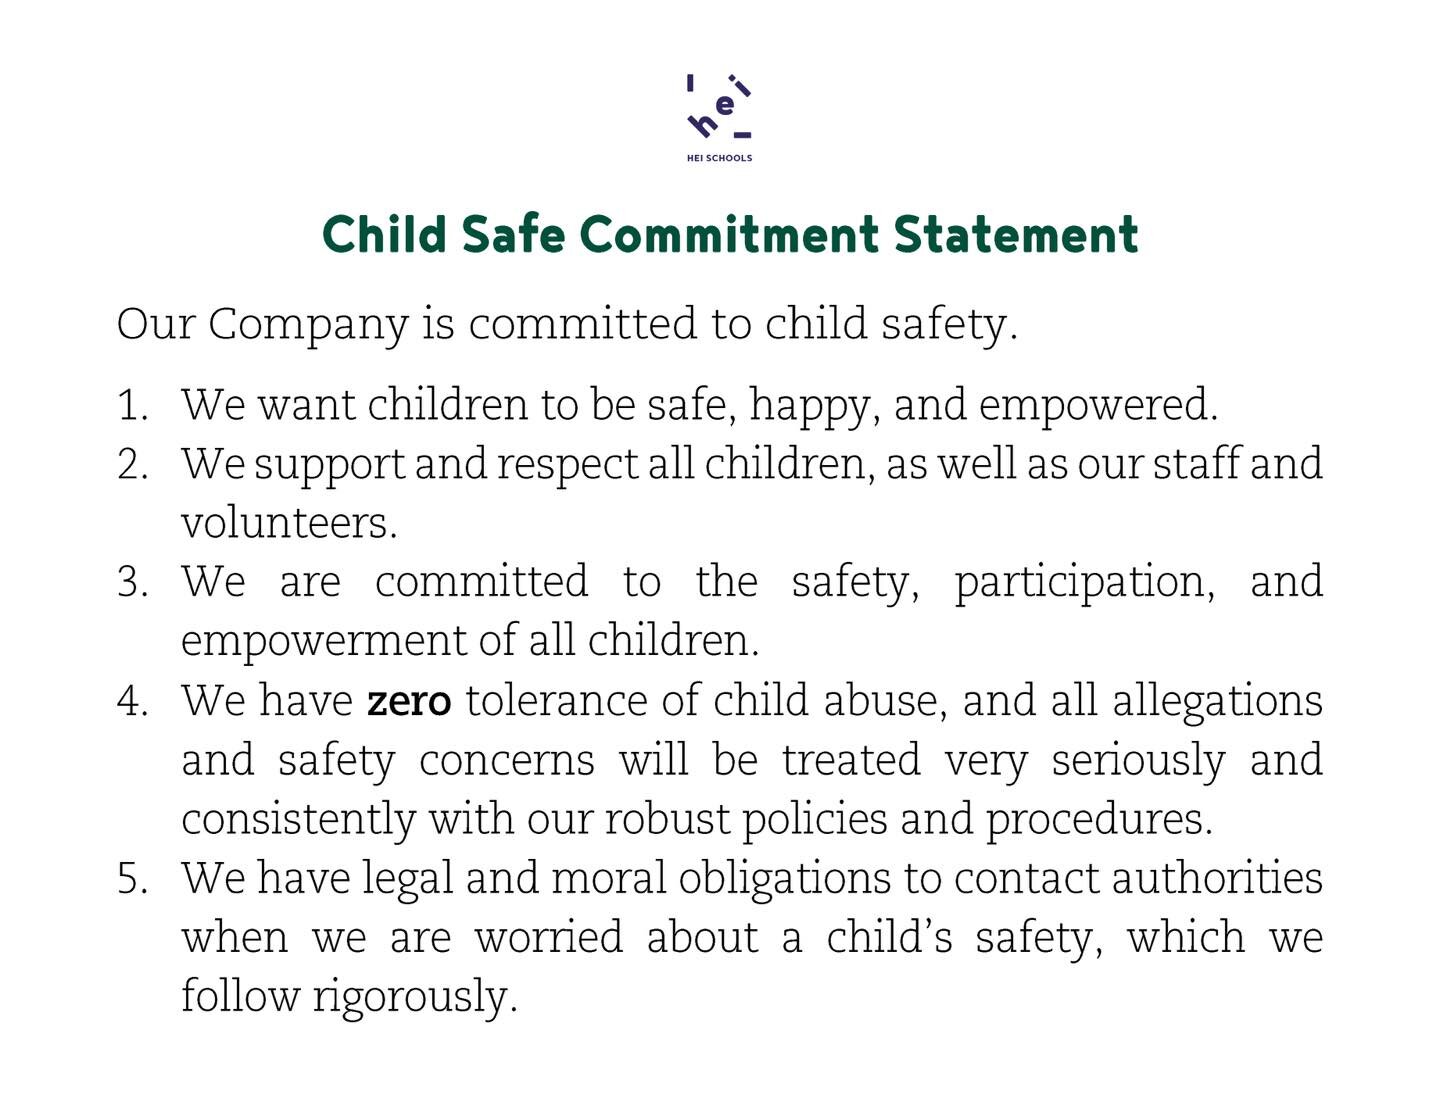 ✨ Child safe commitment statement

🌱 Our Company and Service embeds Child Safe practices in our leadership, governance and culture in accordance with the Child Safe Standards. Our Child Safe commitment Statement guides our practices and we welcome i